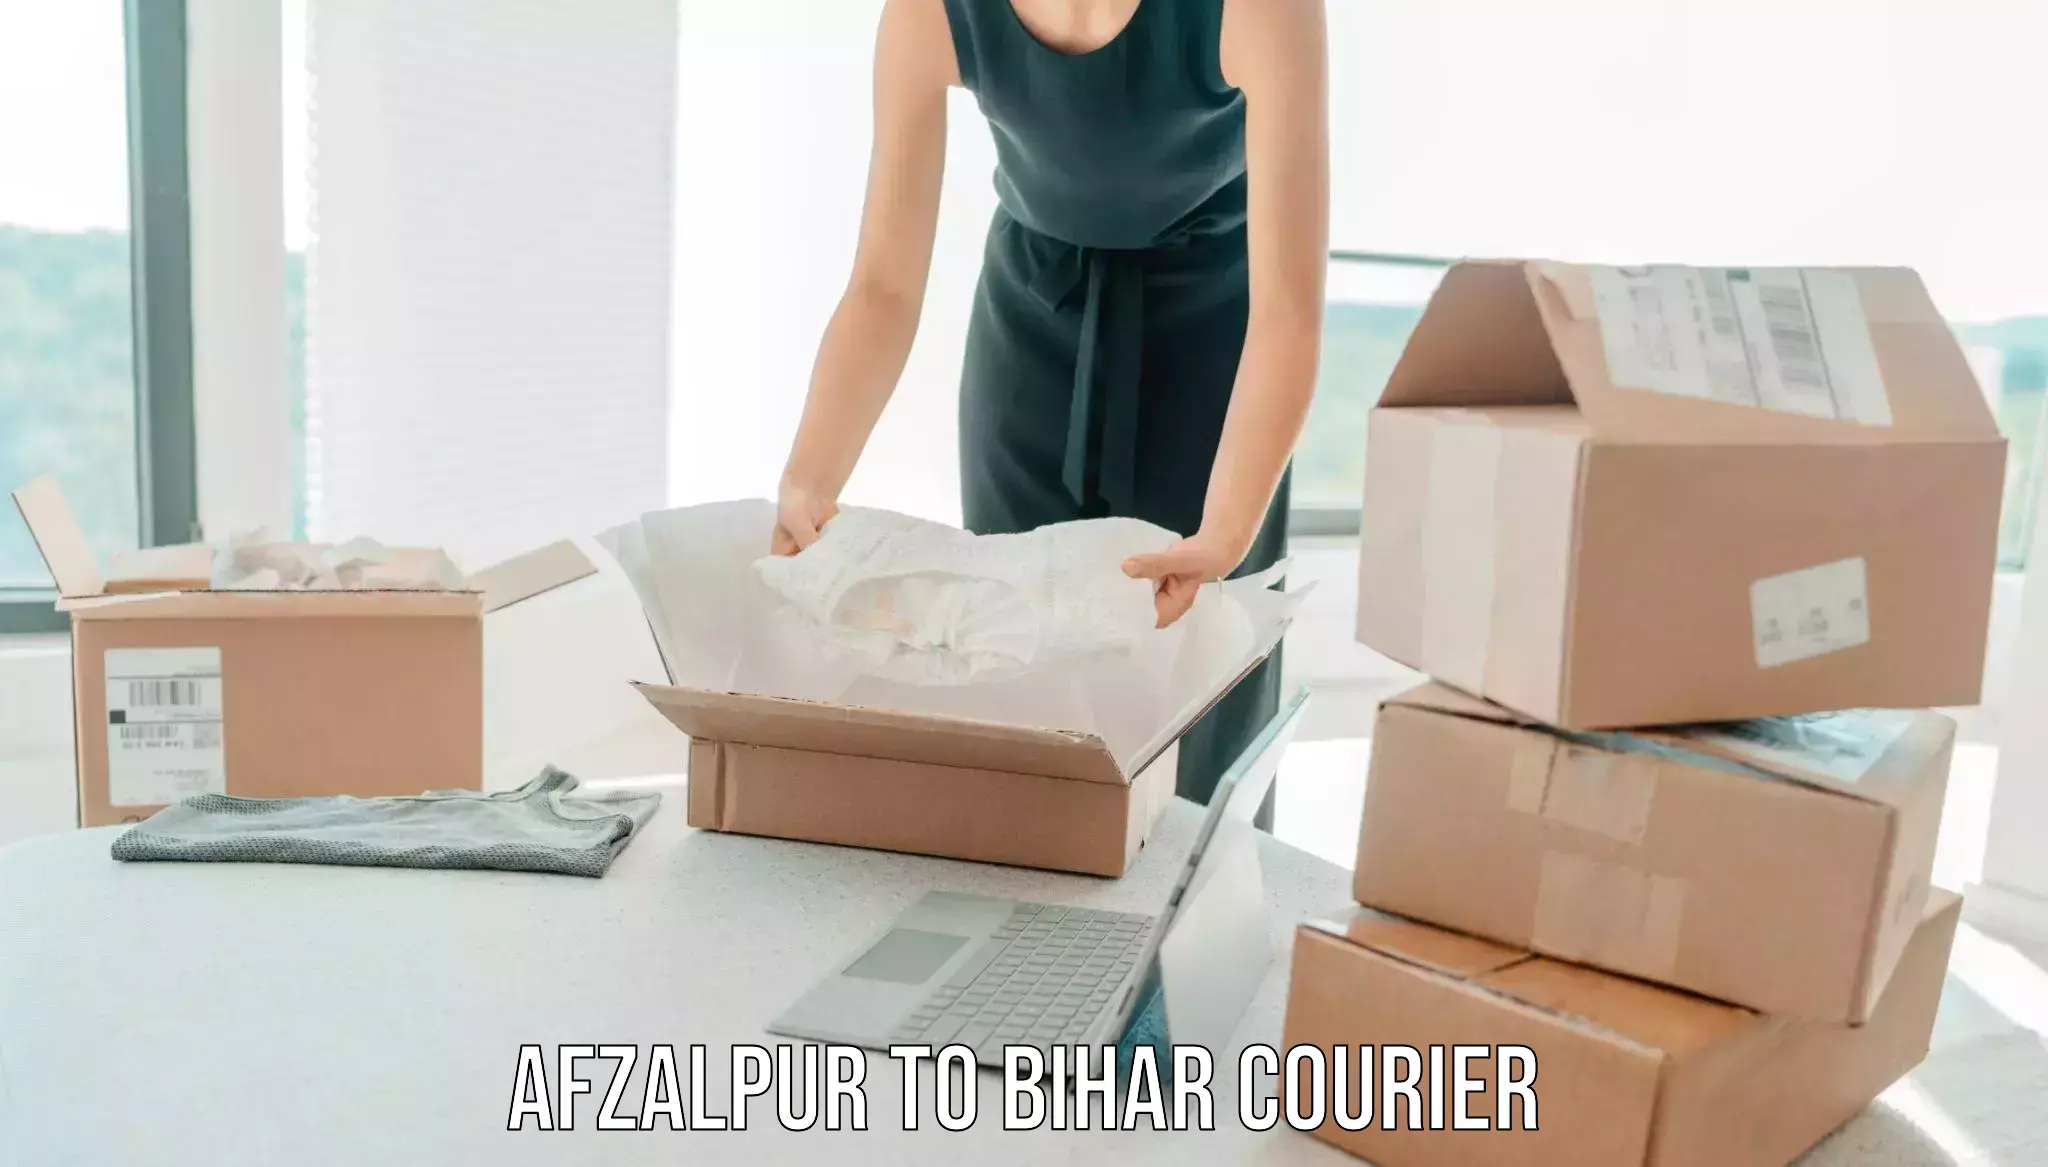 Furniture moving specialists Afzalpur to Sultanganj